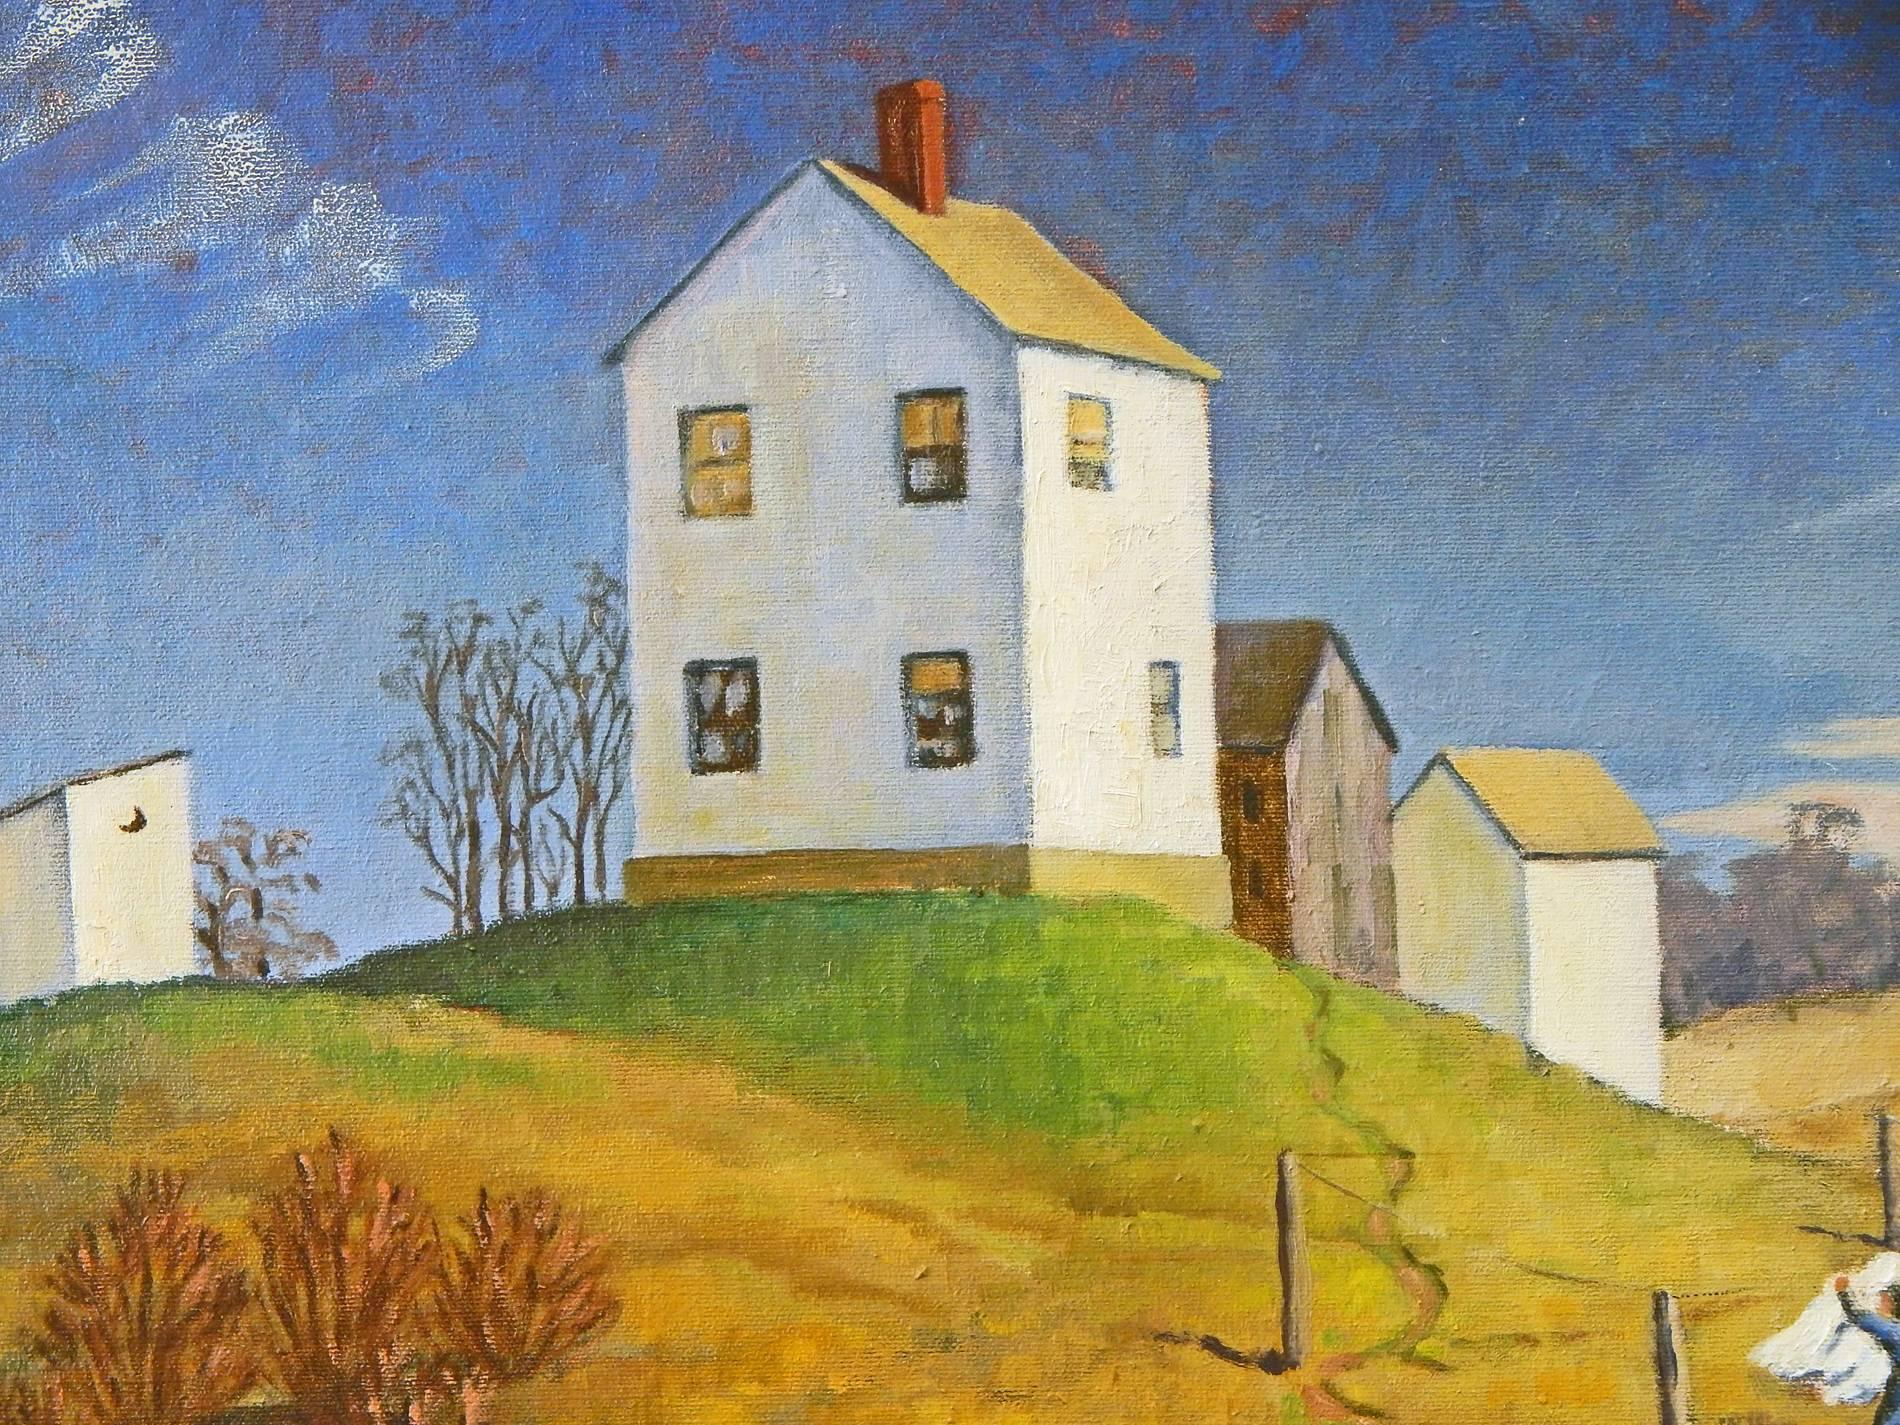 Fresh as a crisp fall day, this painting of a woman taking down laundry at the base of a hill dominated by her home above is a reassuring depiction of wholesome rural life in 1941, perhaps in North Carolina, on the eve of America's entry into the